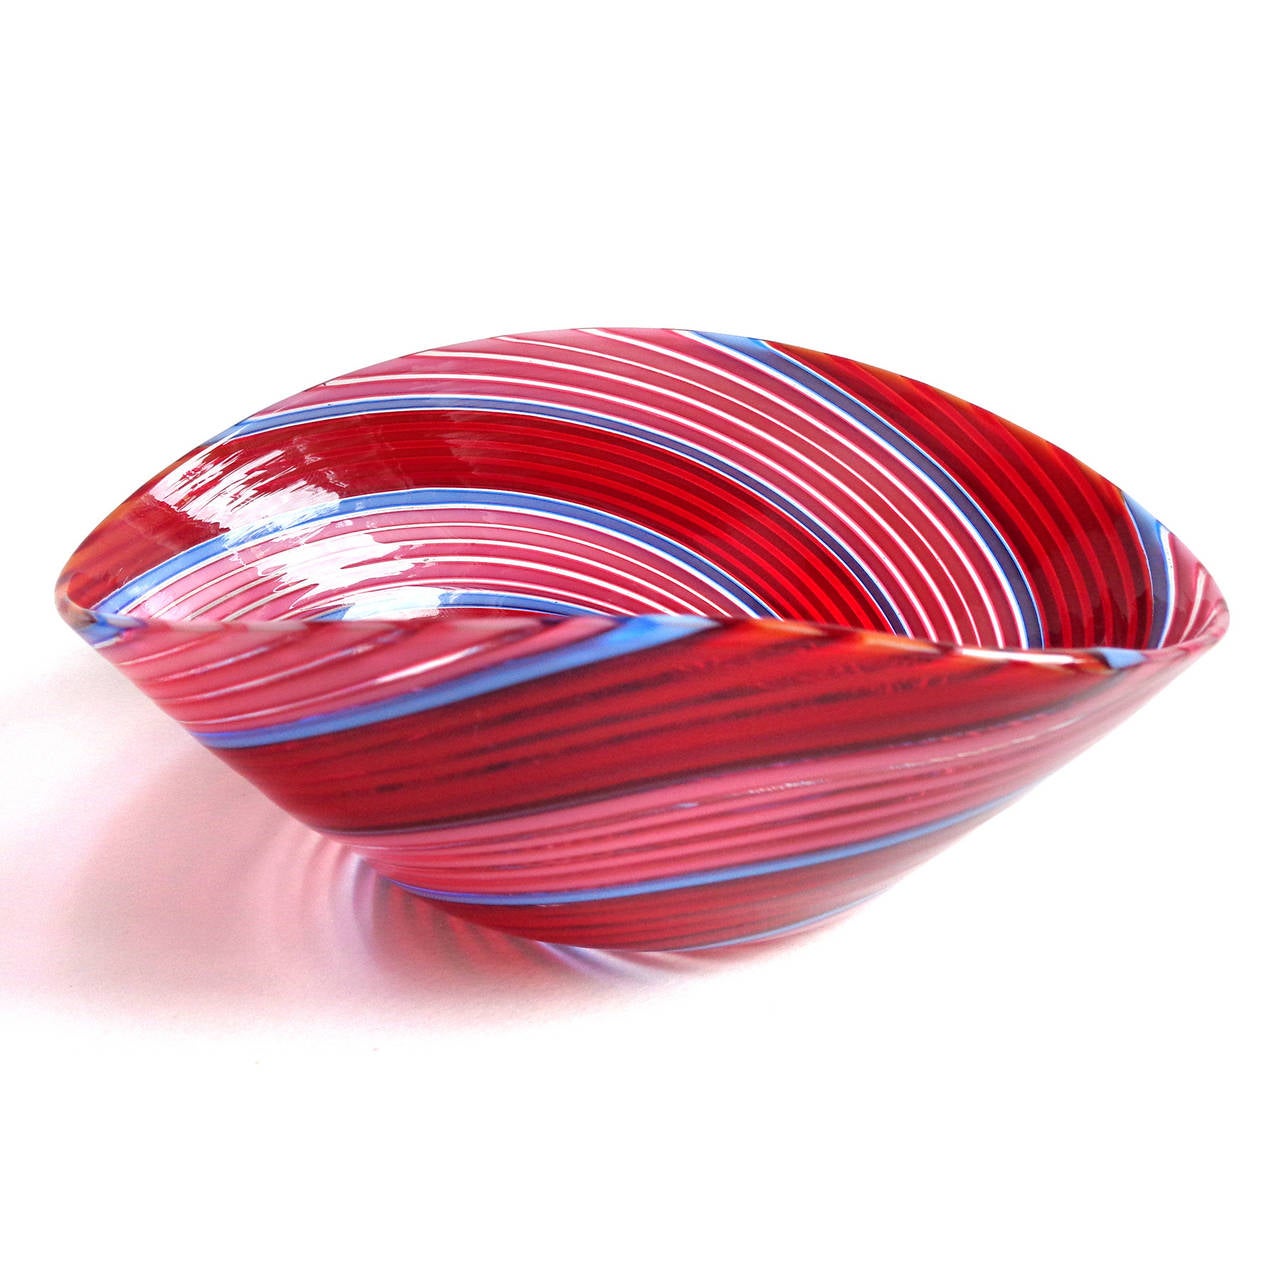 Beautiful vintage Murano hand blown red, pink and blue ribbons Italian art glass dish. Documented to designer Dino Martens for Aureliano Toso. The ribbons alternate, creating an optic pattern. Can be used as a display piece on any table. Use it as a